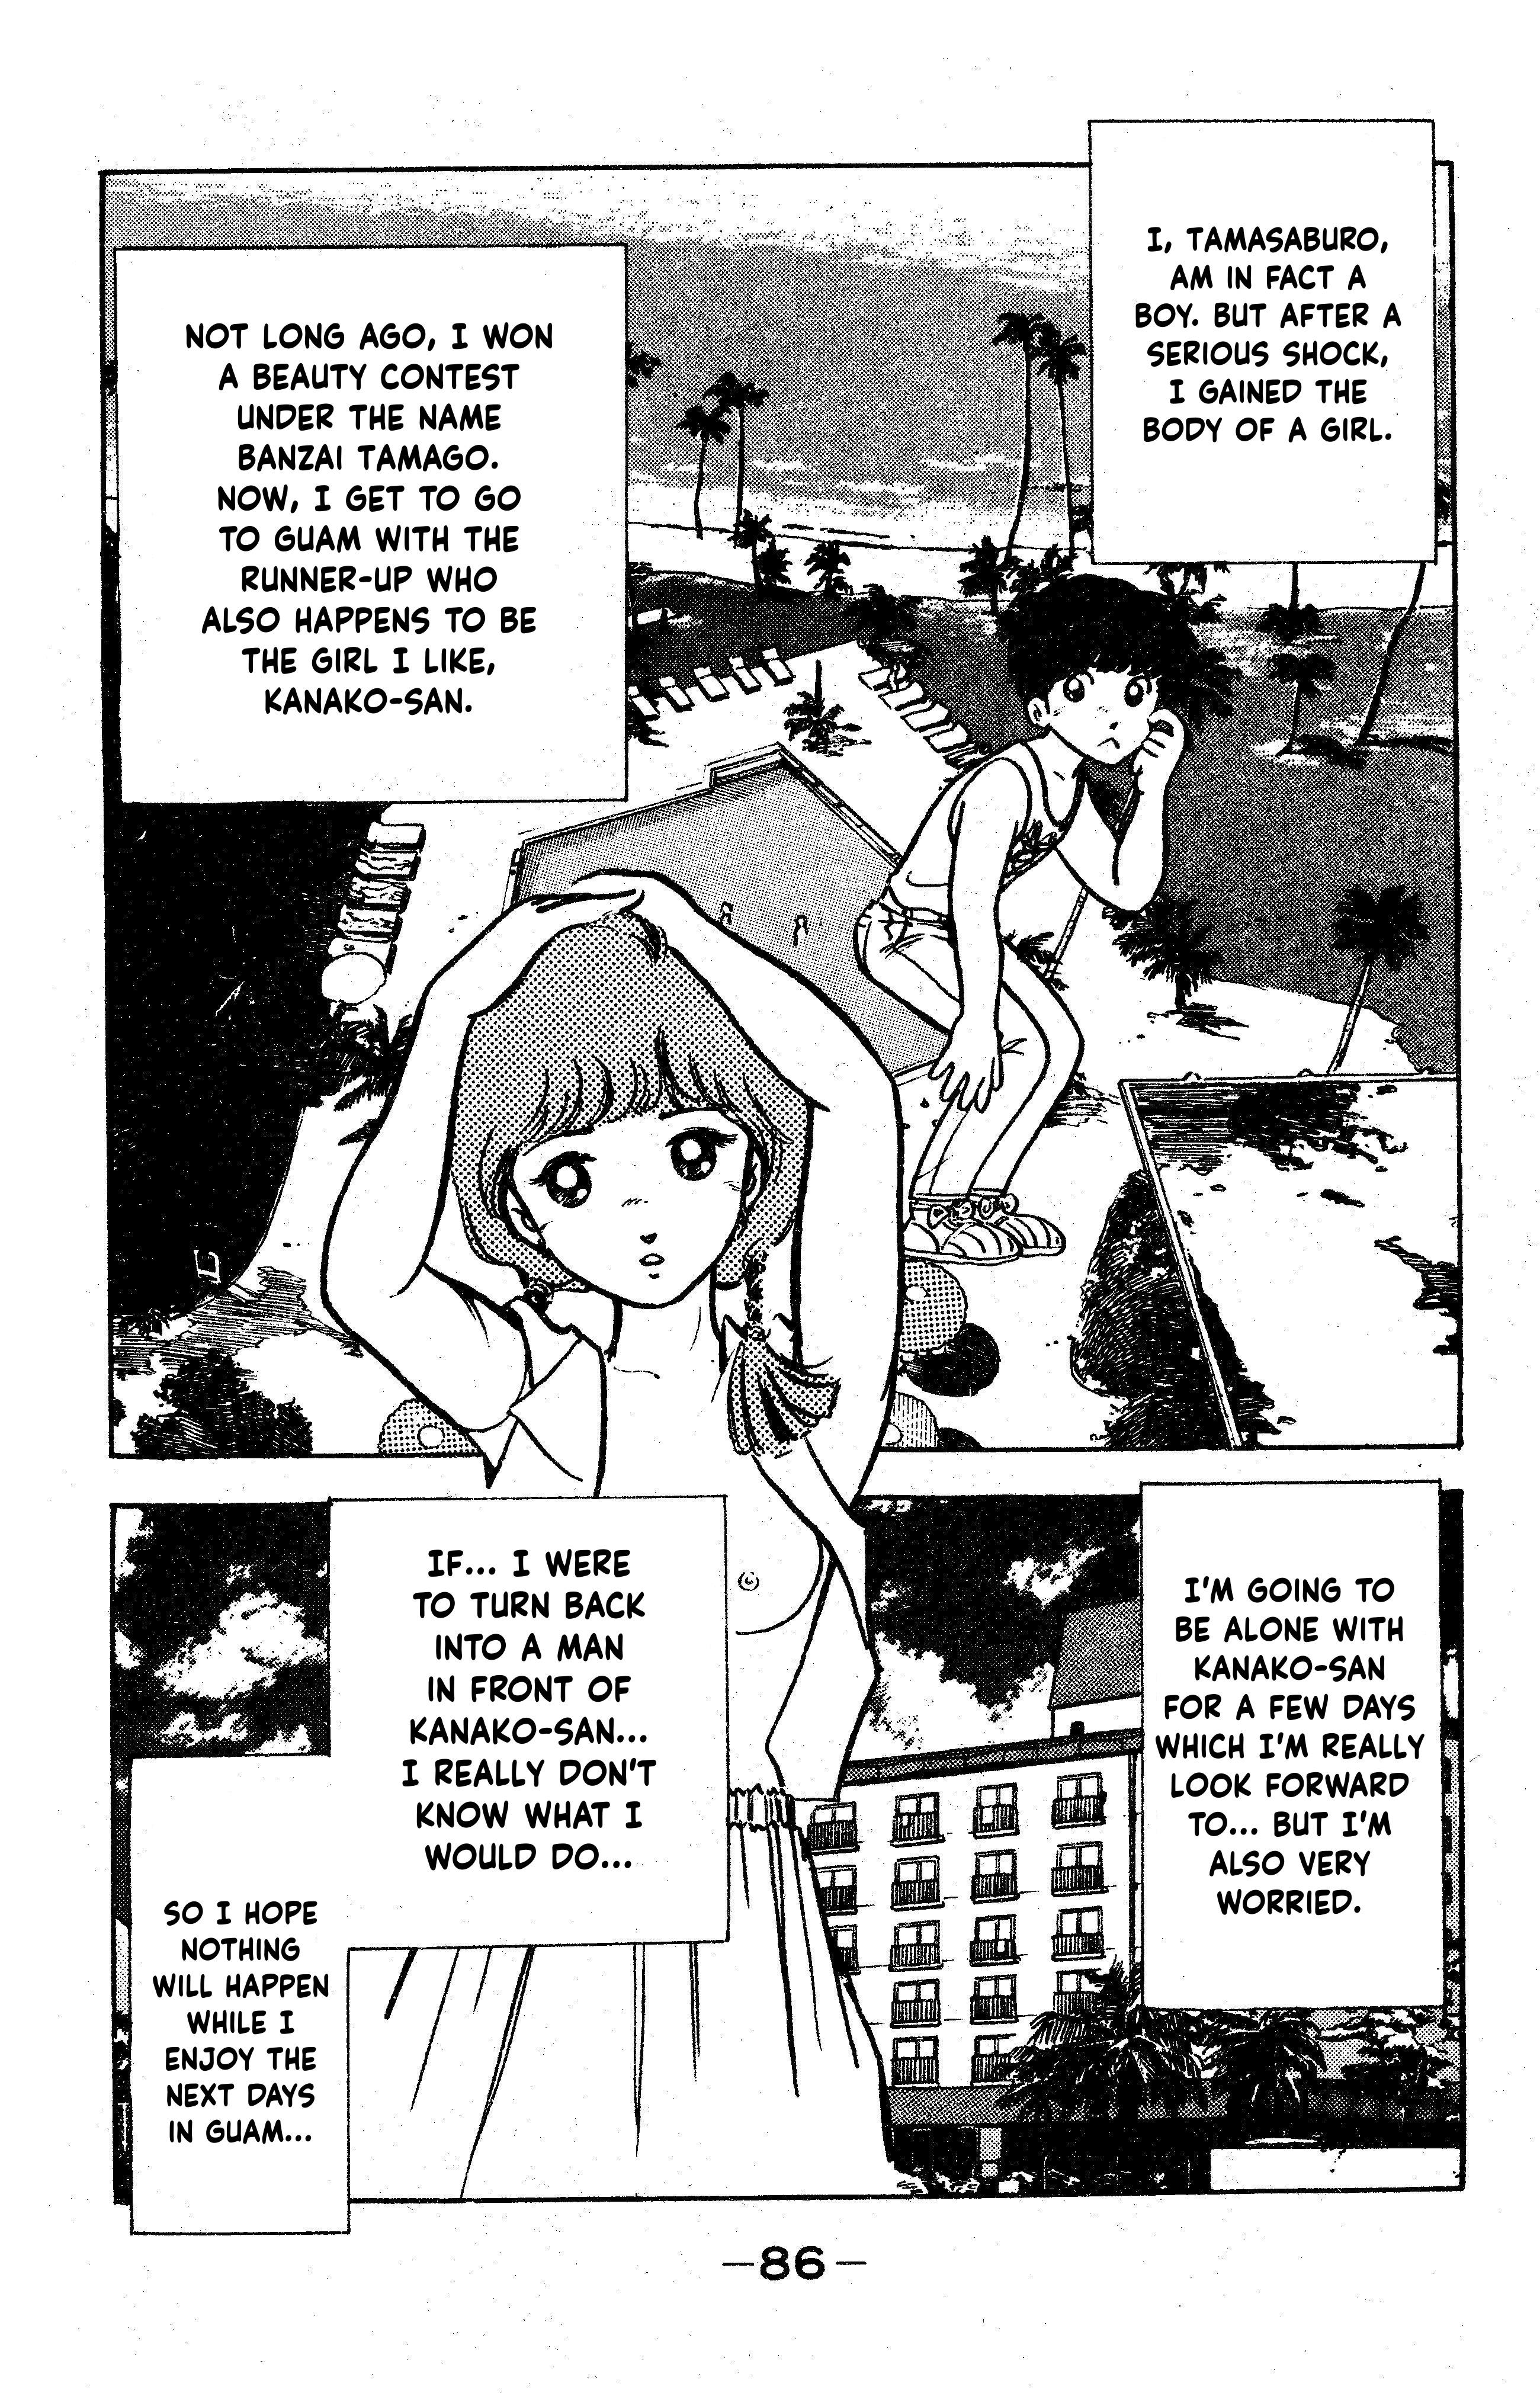 Boku Tamasaburo Vol.1 Chapter 4: Cheers From Guam!! - Picture 2